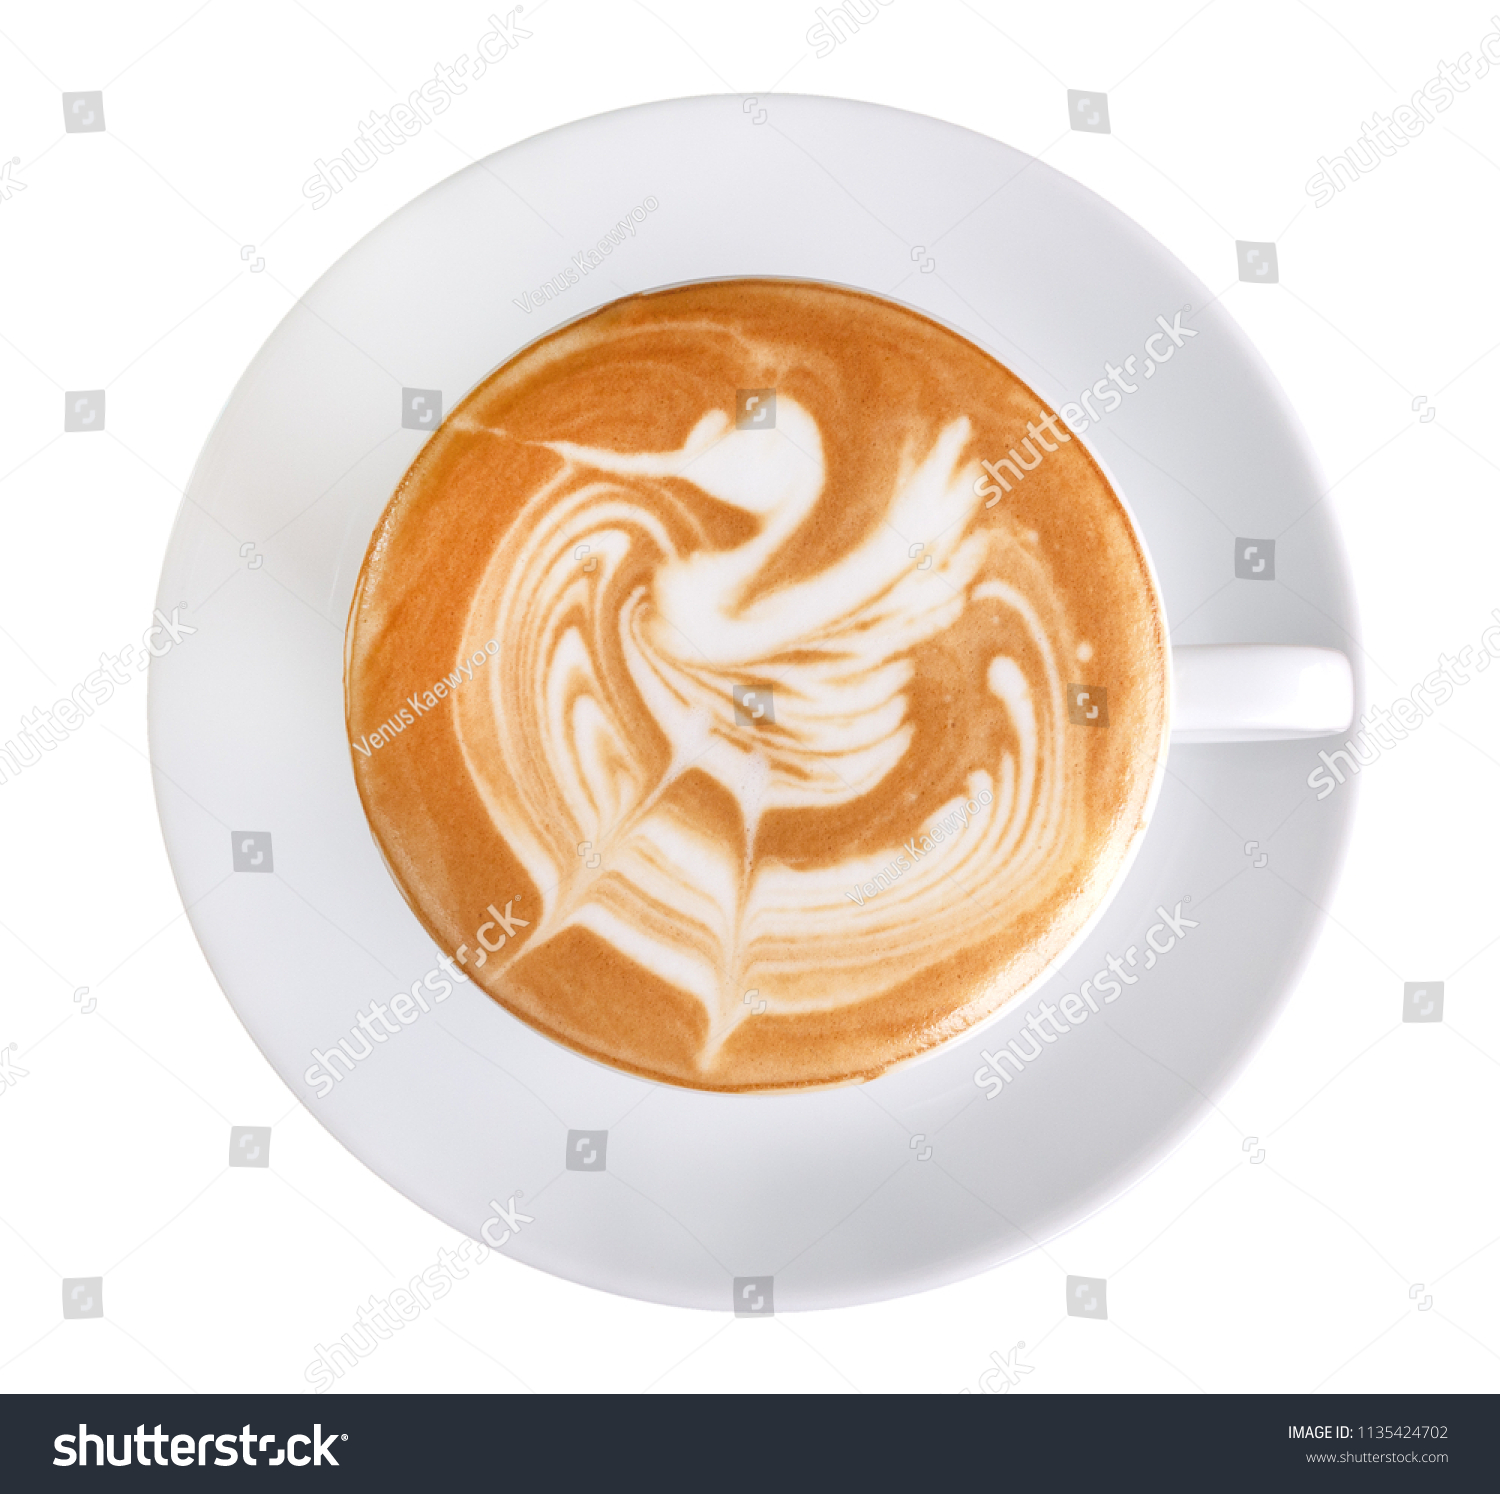 Top view of hot coffee latte art swan shape foam isolated on white background, clipping path included #1135424702